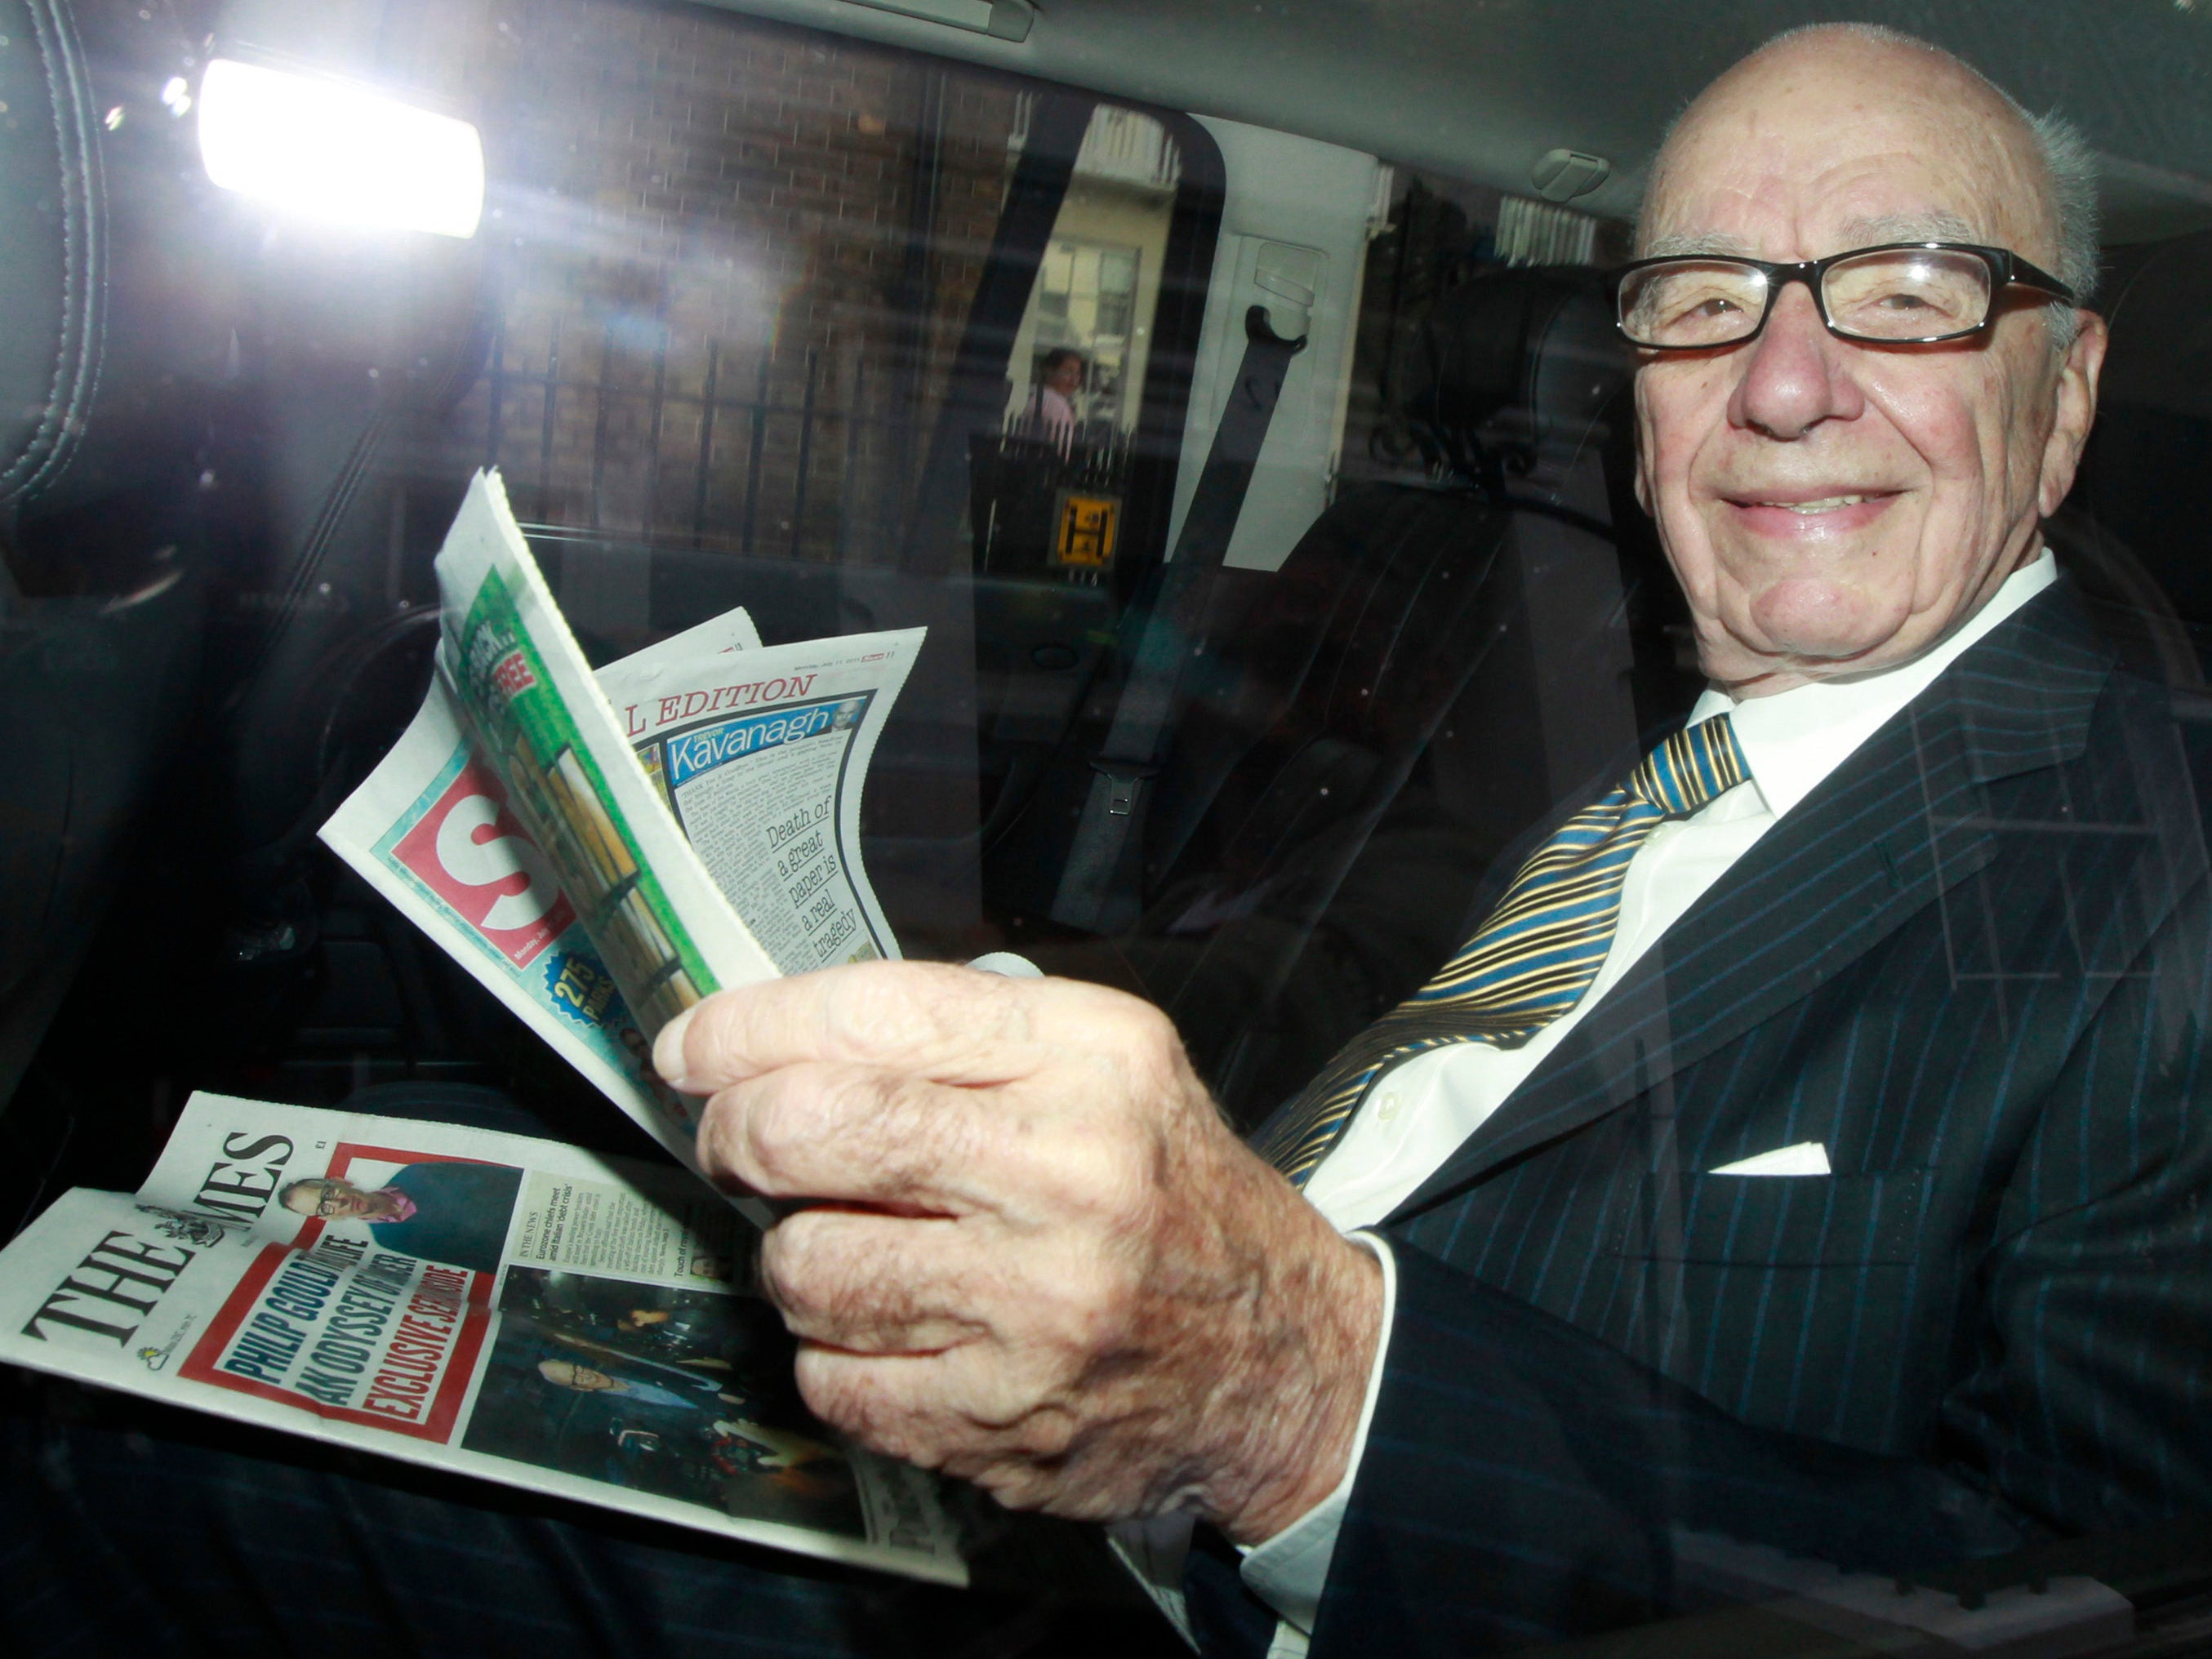 Andrew Neil: Line between Murdoch press and state became blurred during Blair era